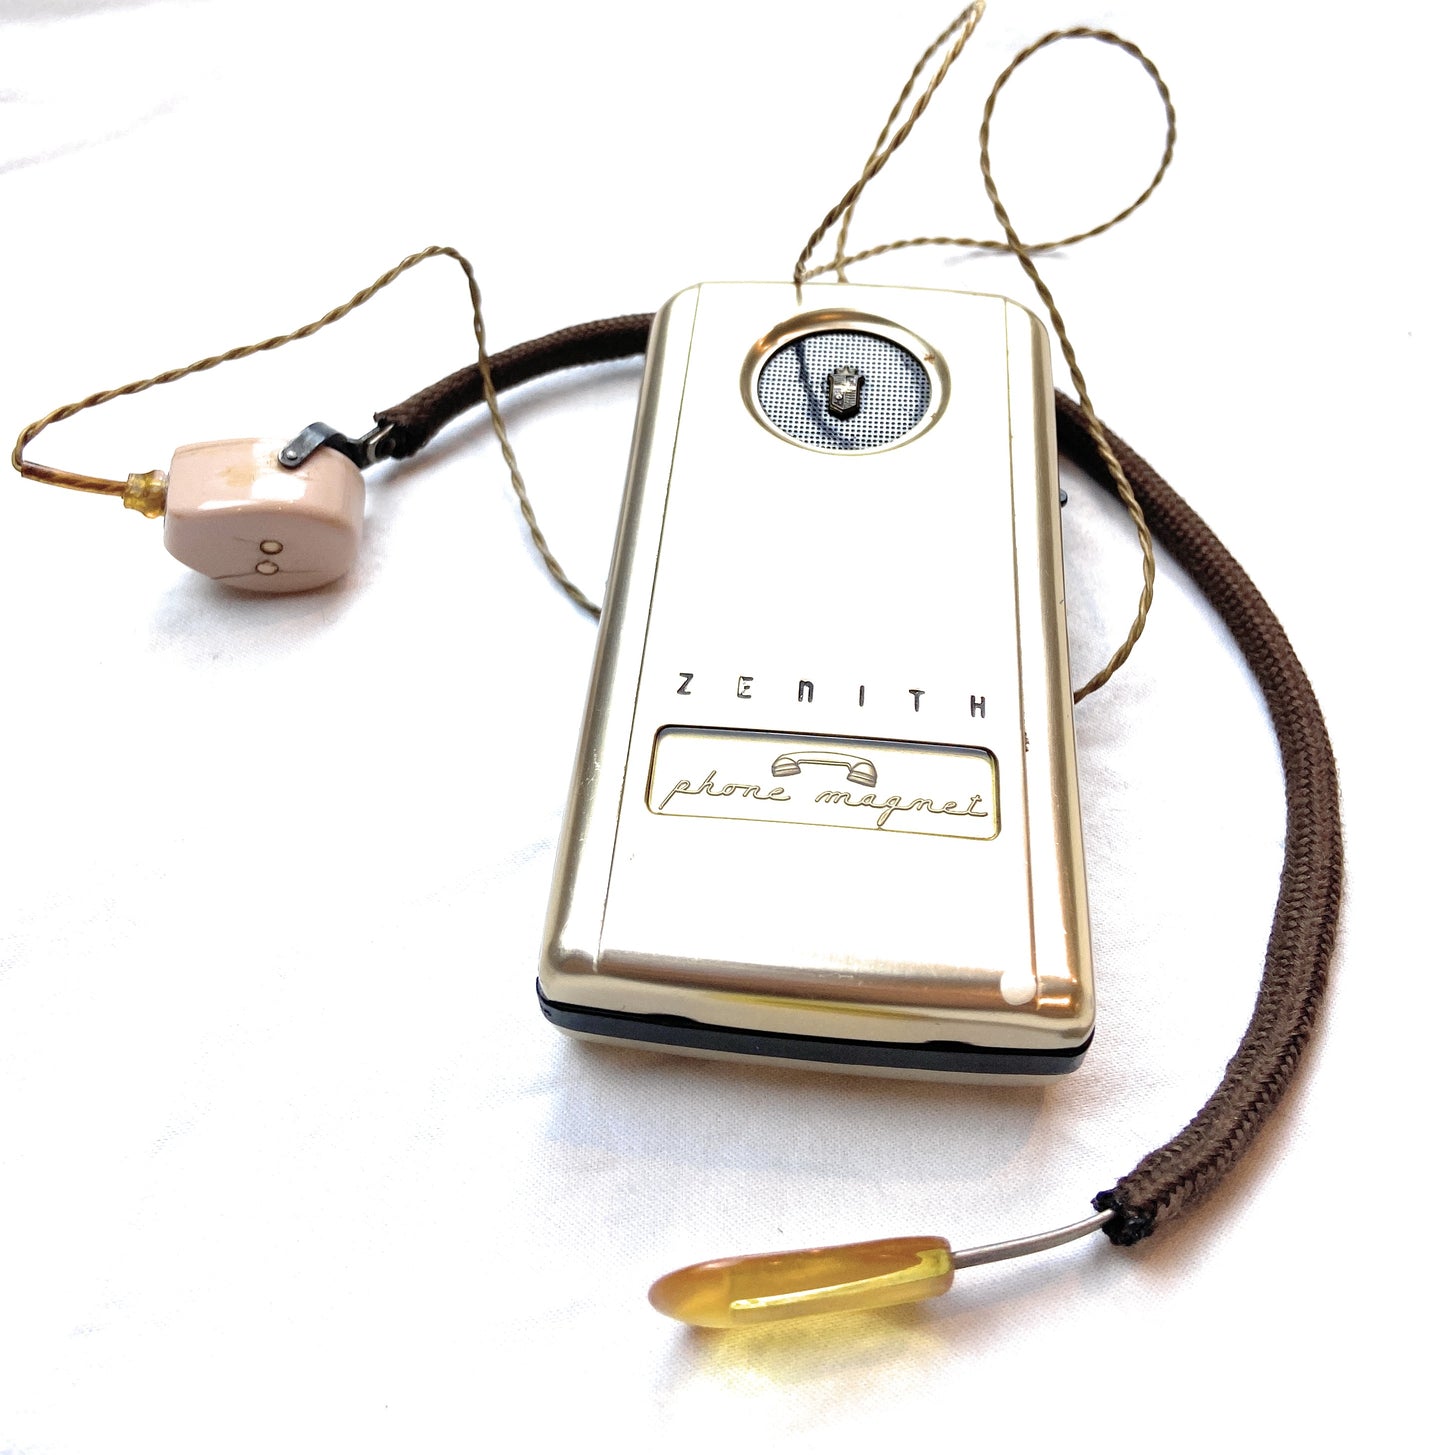 Vintage Zenith phone magnet hearing aid